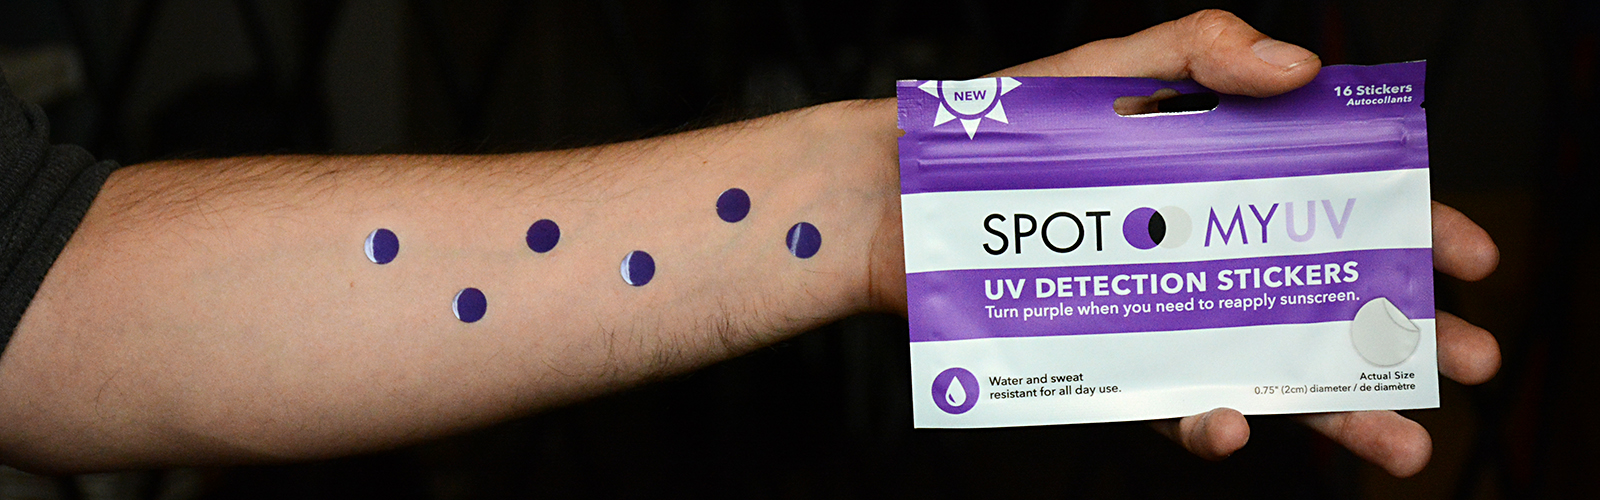 Suncayr’s adhesive spot changes from purple to clear to indicate when skin is adequately protected by sunscreen.